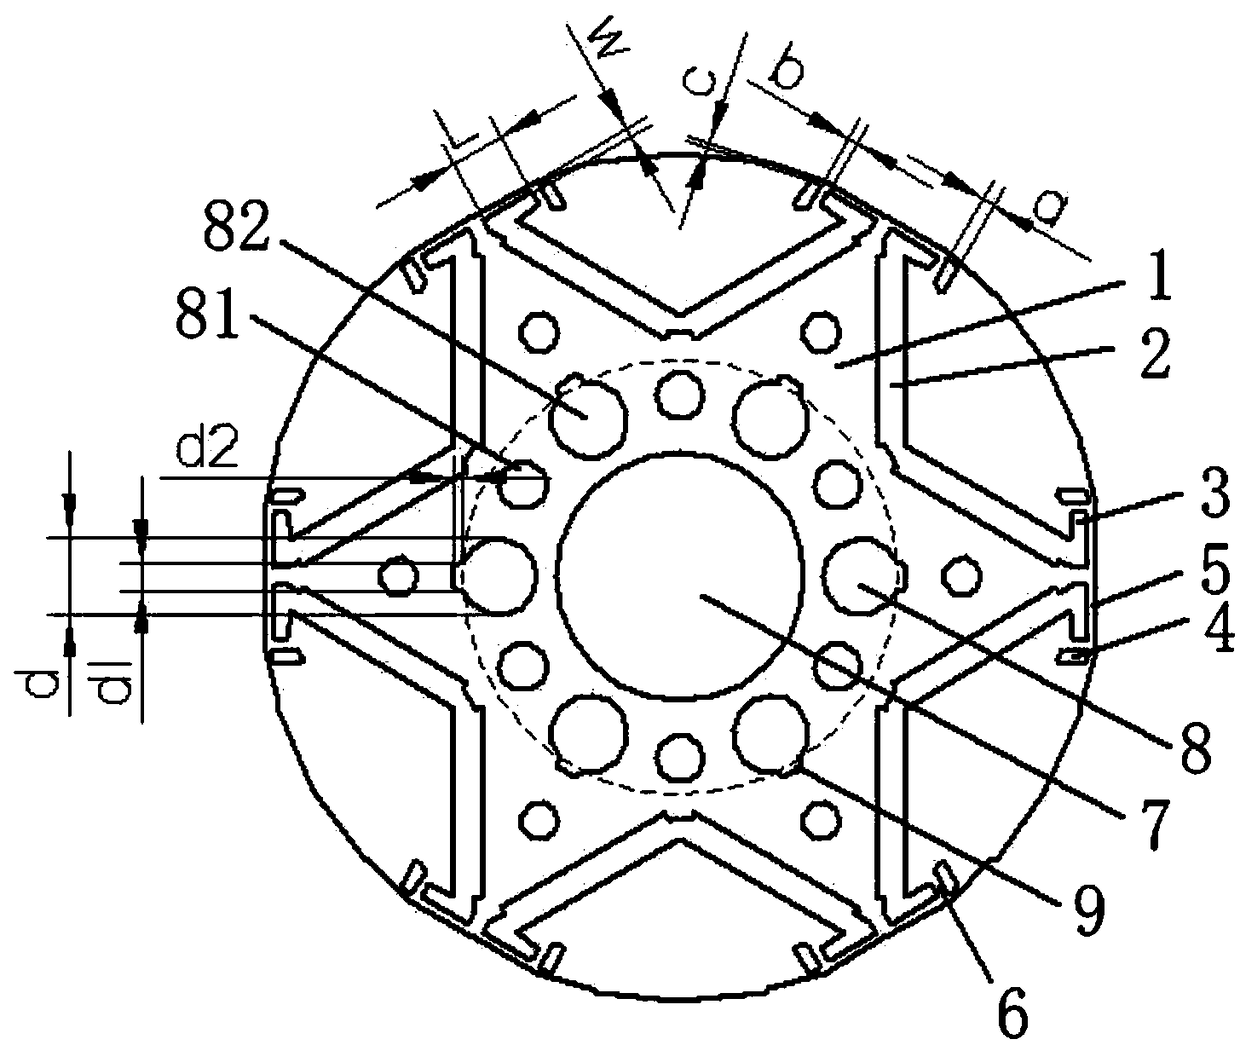 Electric motor rotor, electric motor and direct current variable frequency compressor